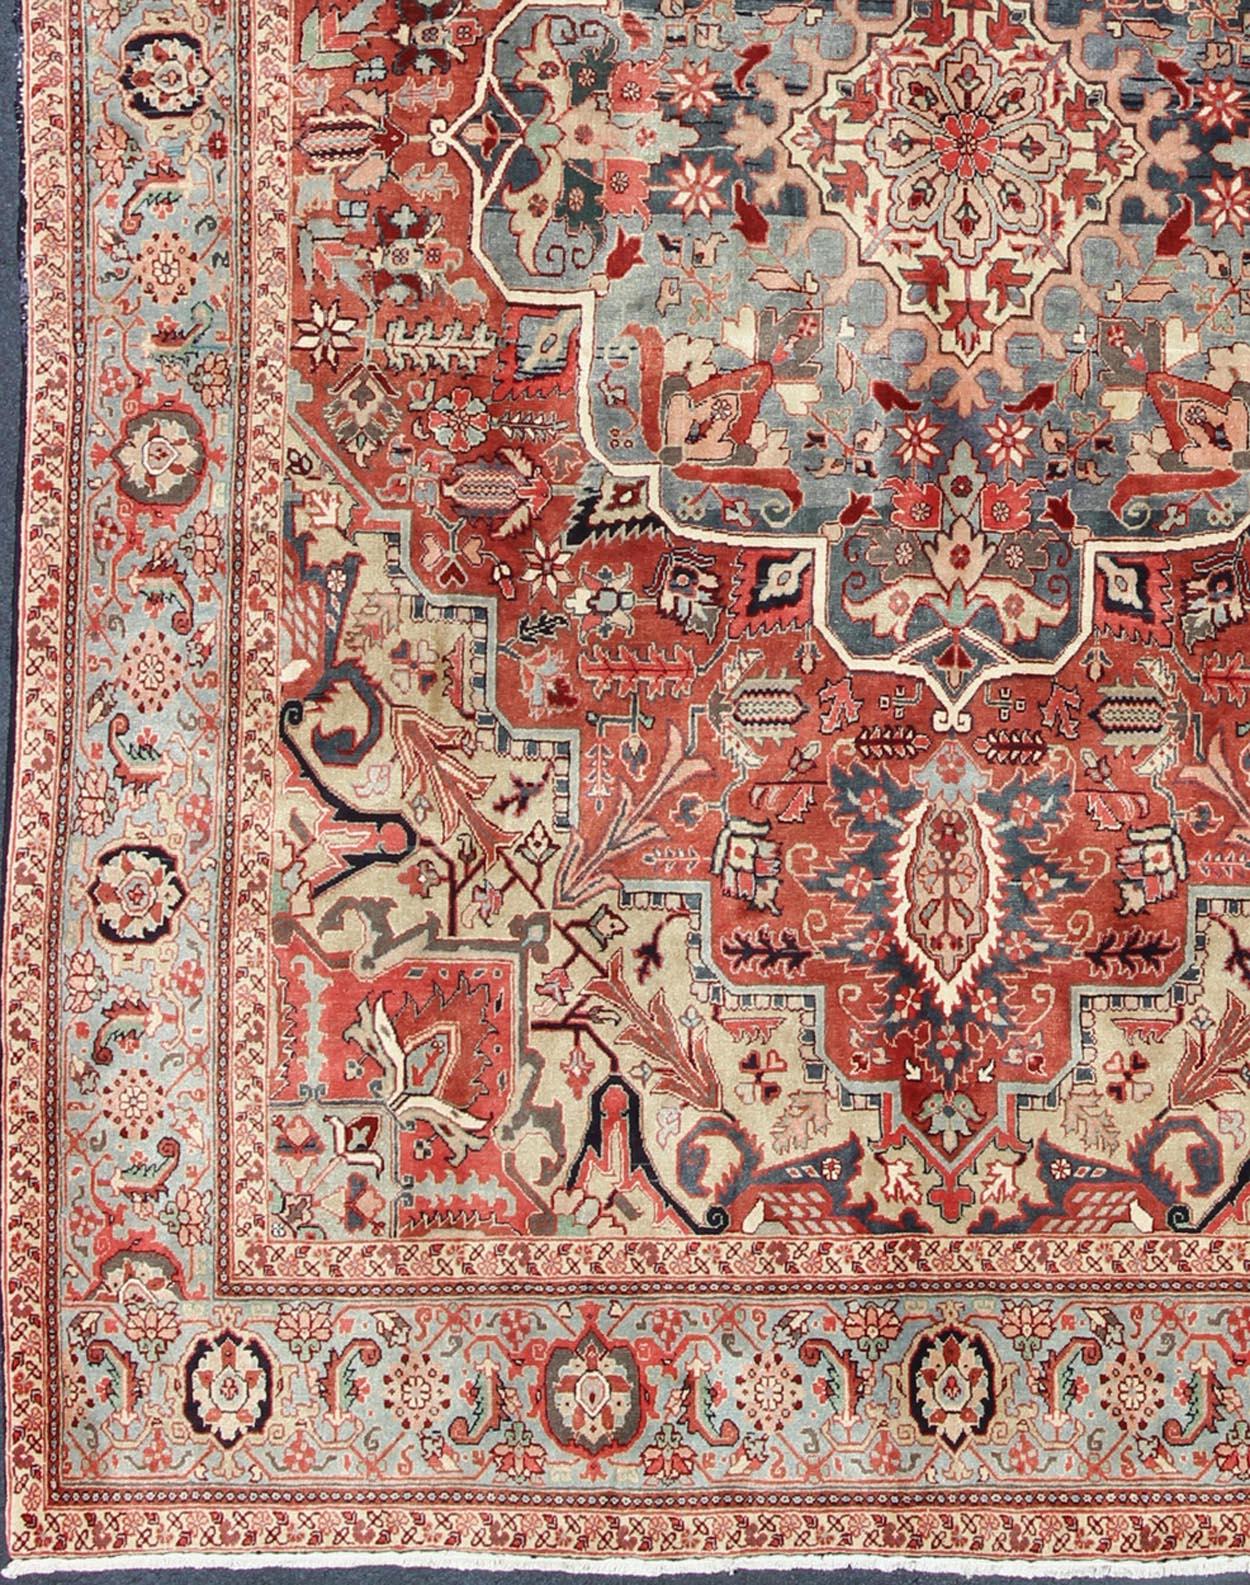 This exquisite vintage Persian Heriz carpet displays an impressively complex design and sophisticated palette. A refined central medallion is delicately drawn in ivory and is filled with a variety of palmettes and flowers. Beautiful feathered